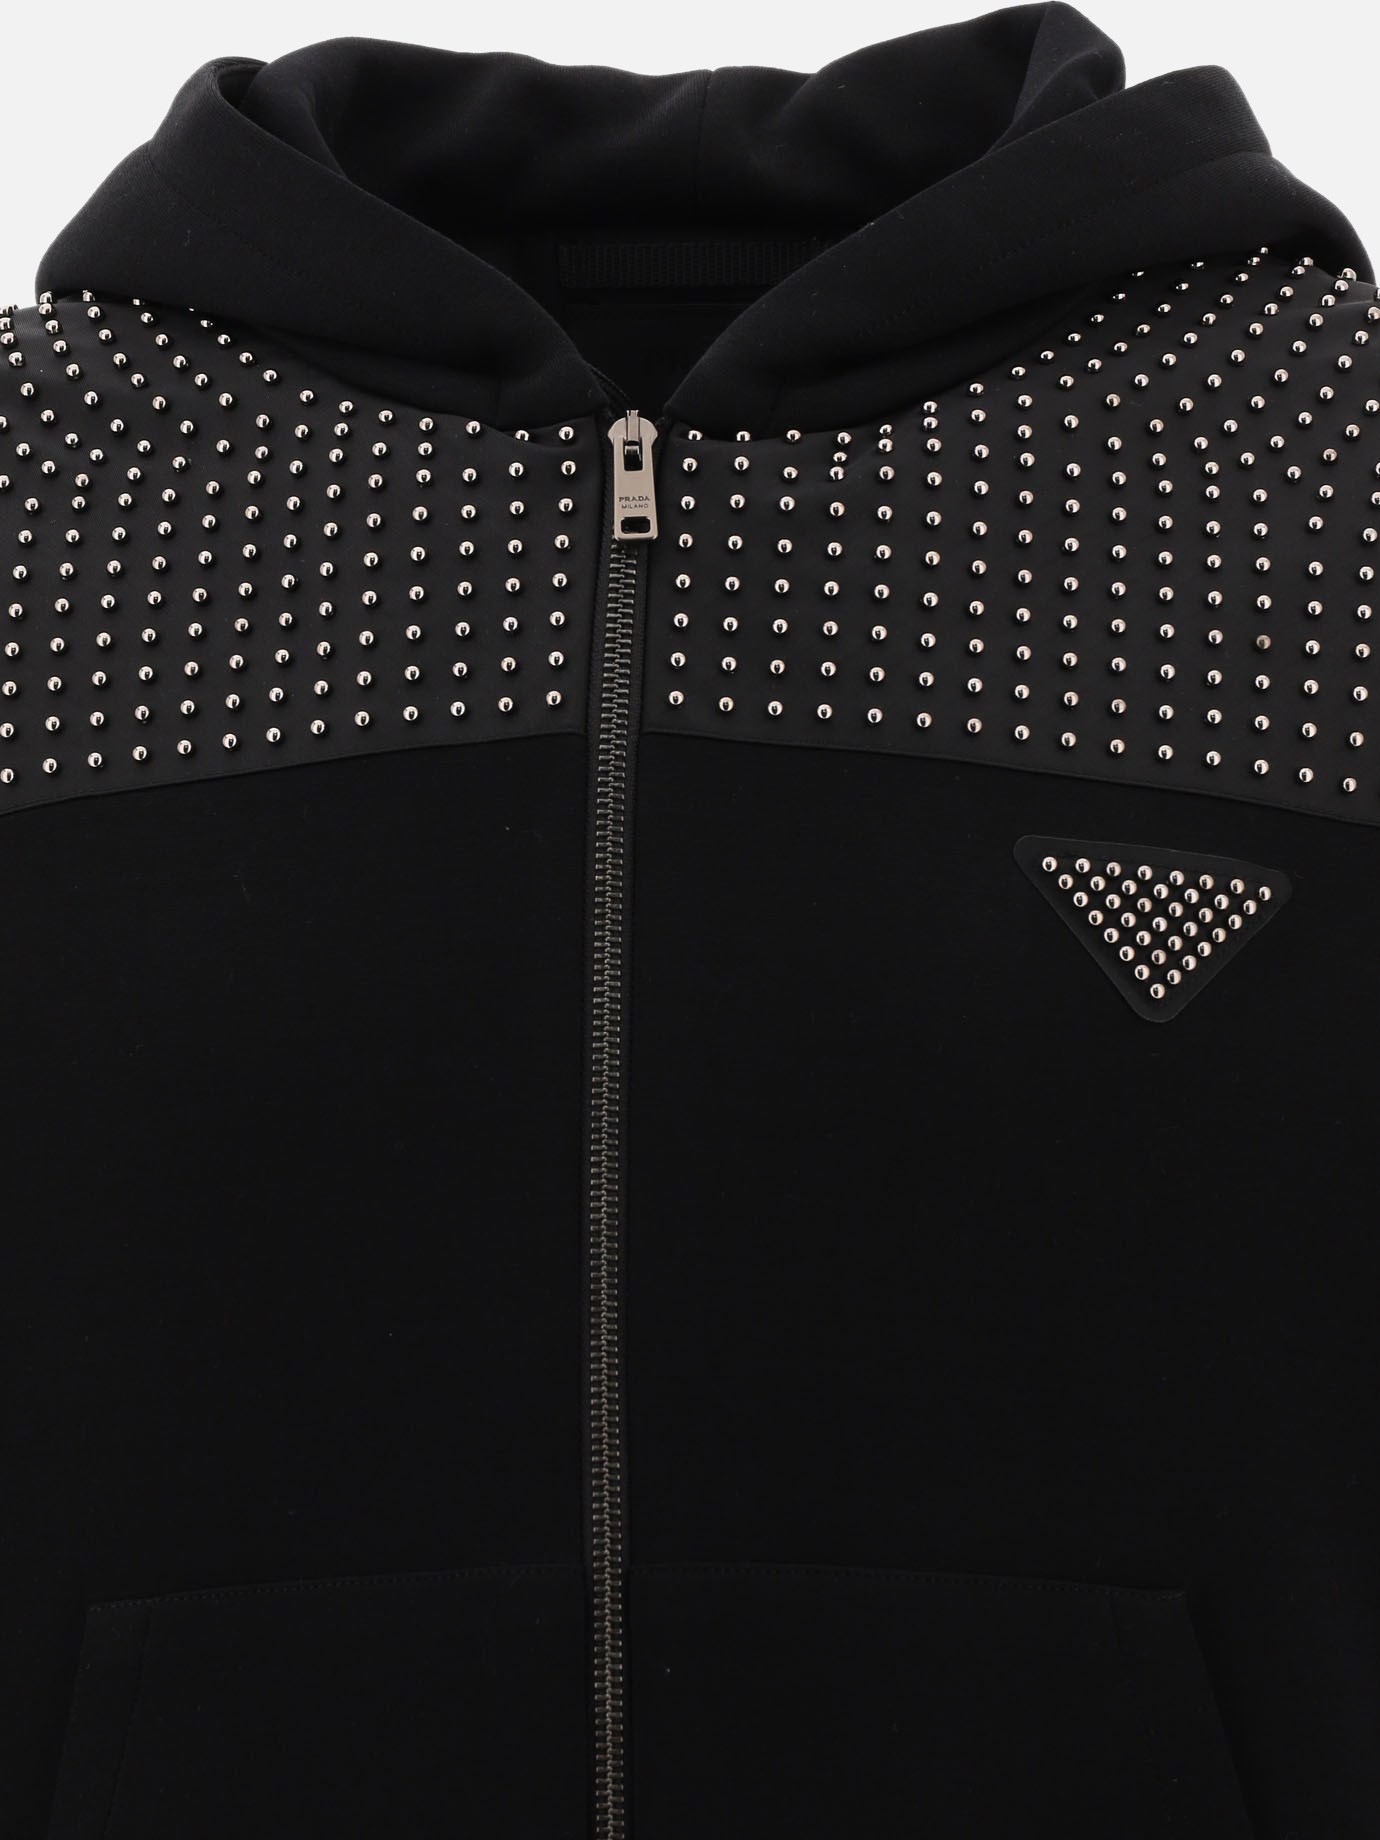  Double  hoodie with studs by Prada